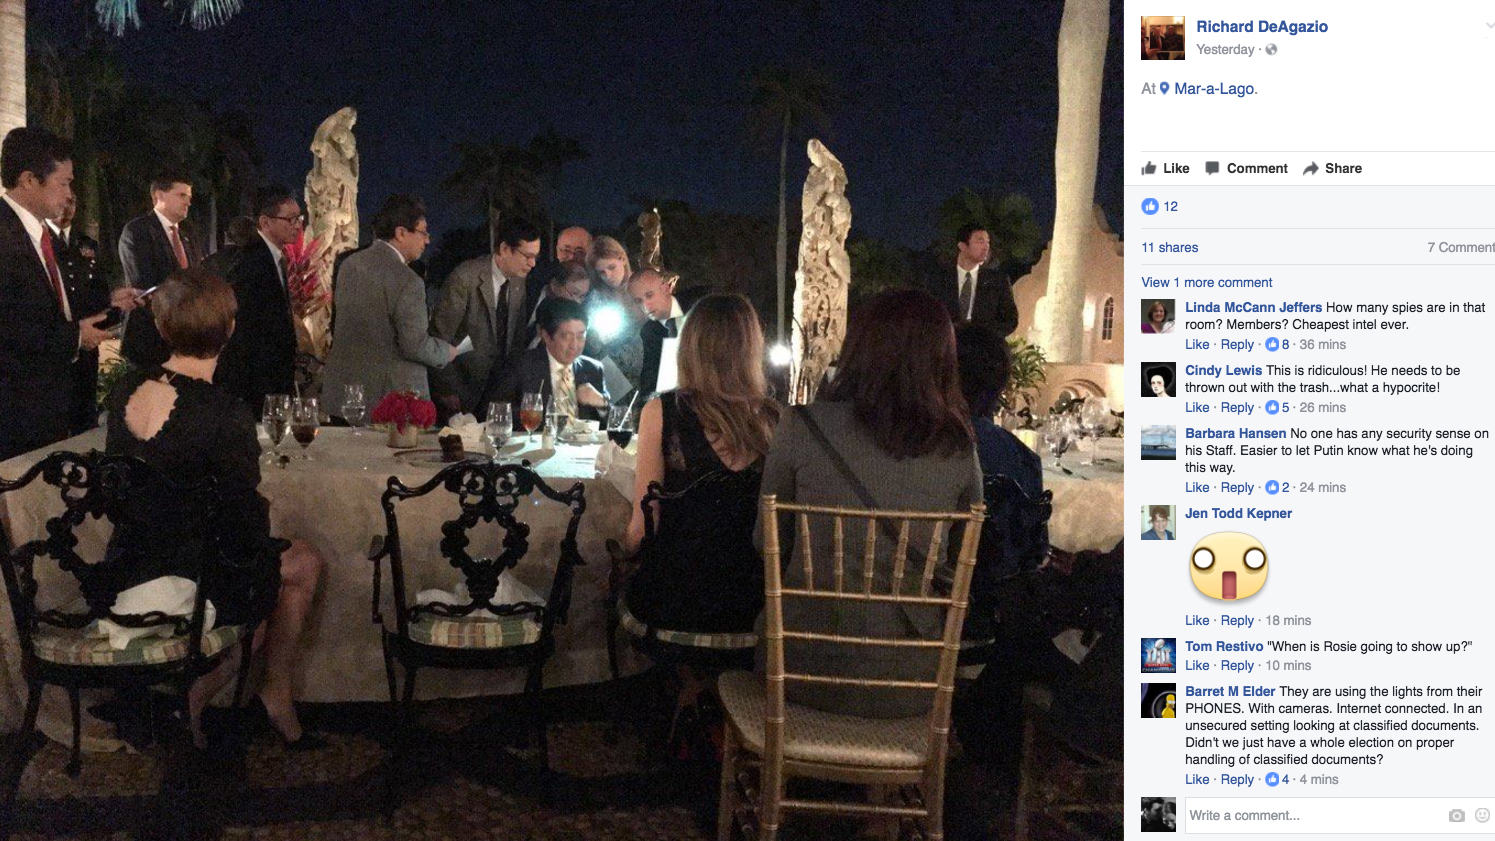 A screengrab of a photo posted on the Facebook page of Richard DeAgazio was said to show Japanese Prime Minister Shinzo Abe huddling with staffers during dinner at President Trump's Mar-a-Lago residence after news spread about North Korea's missile launch.